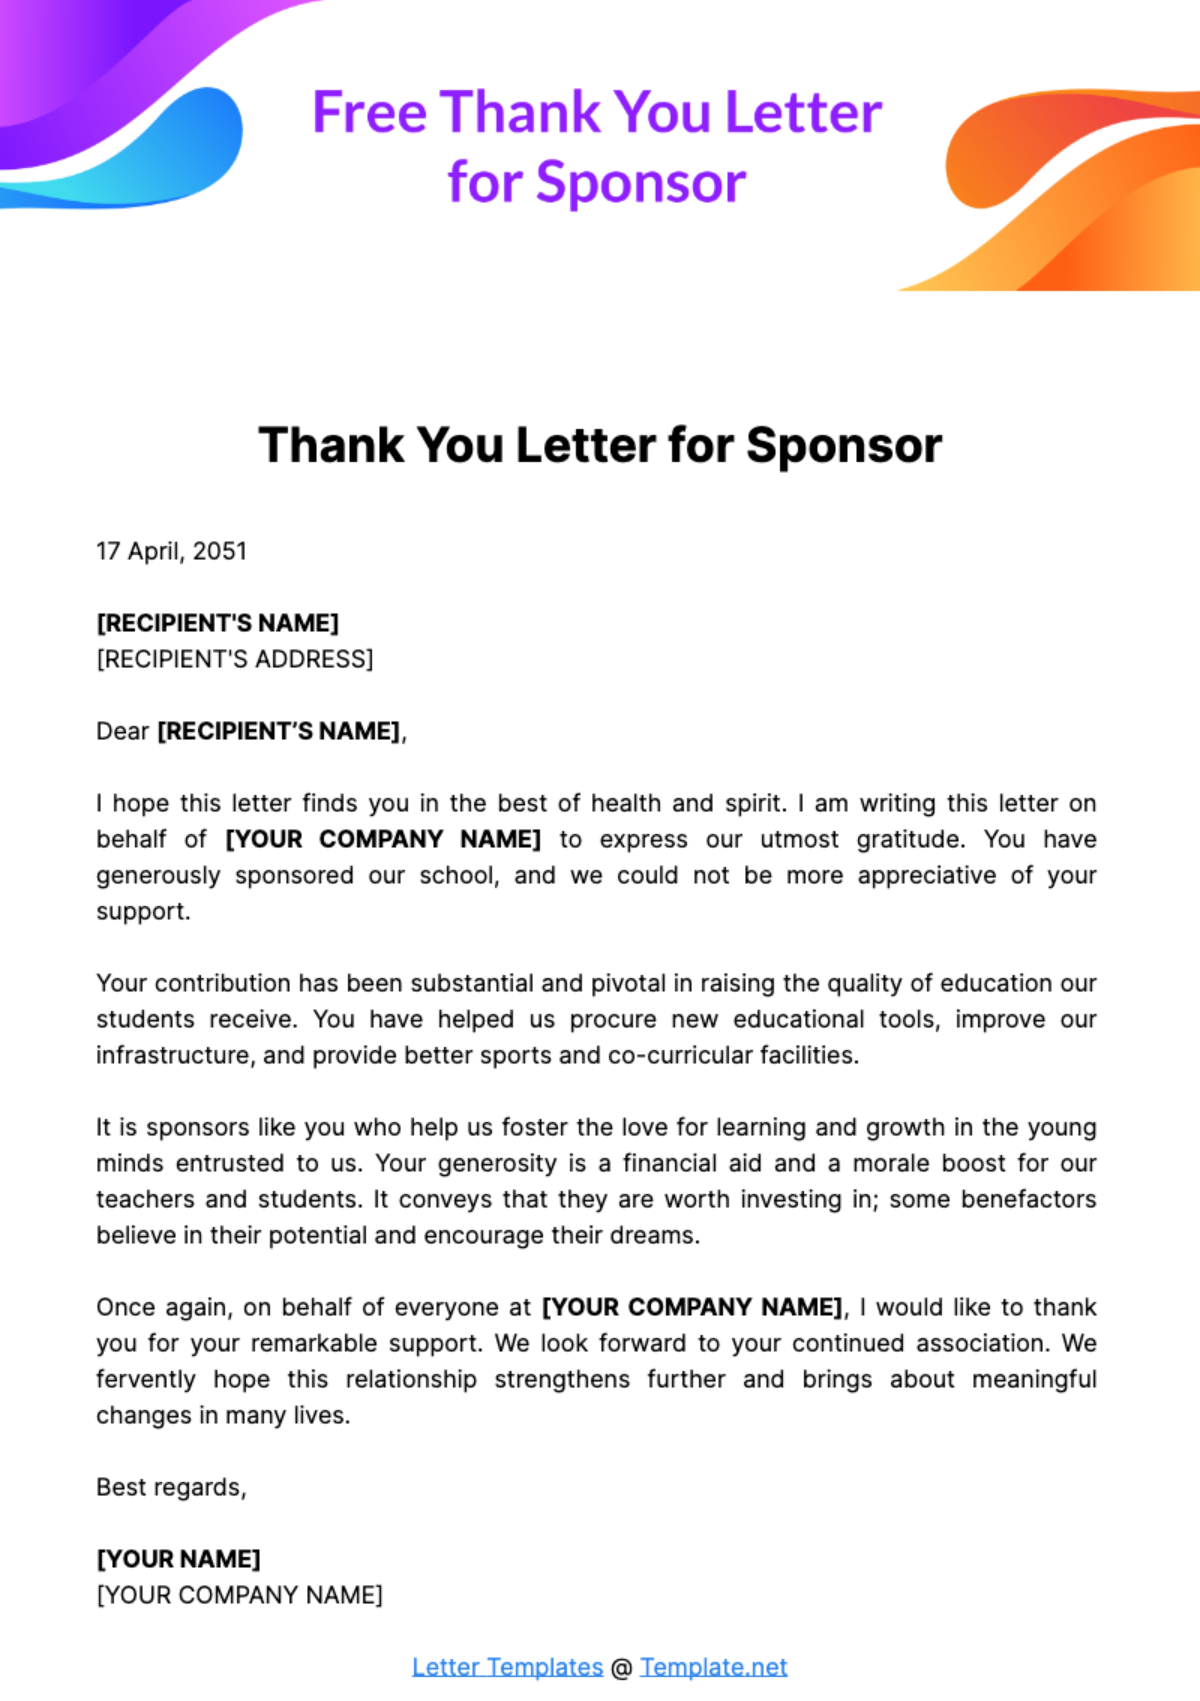 Thank You Letter for Sponsor Template